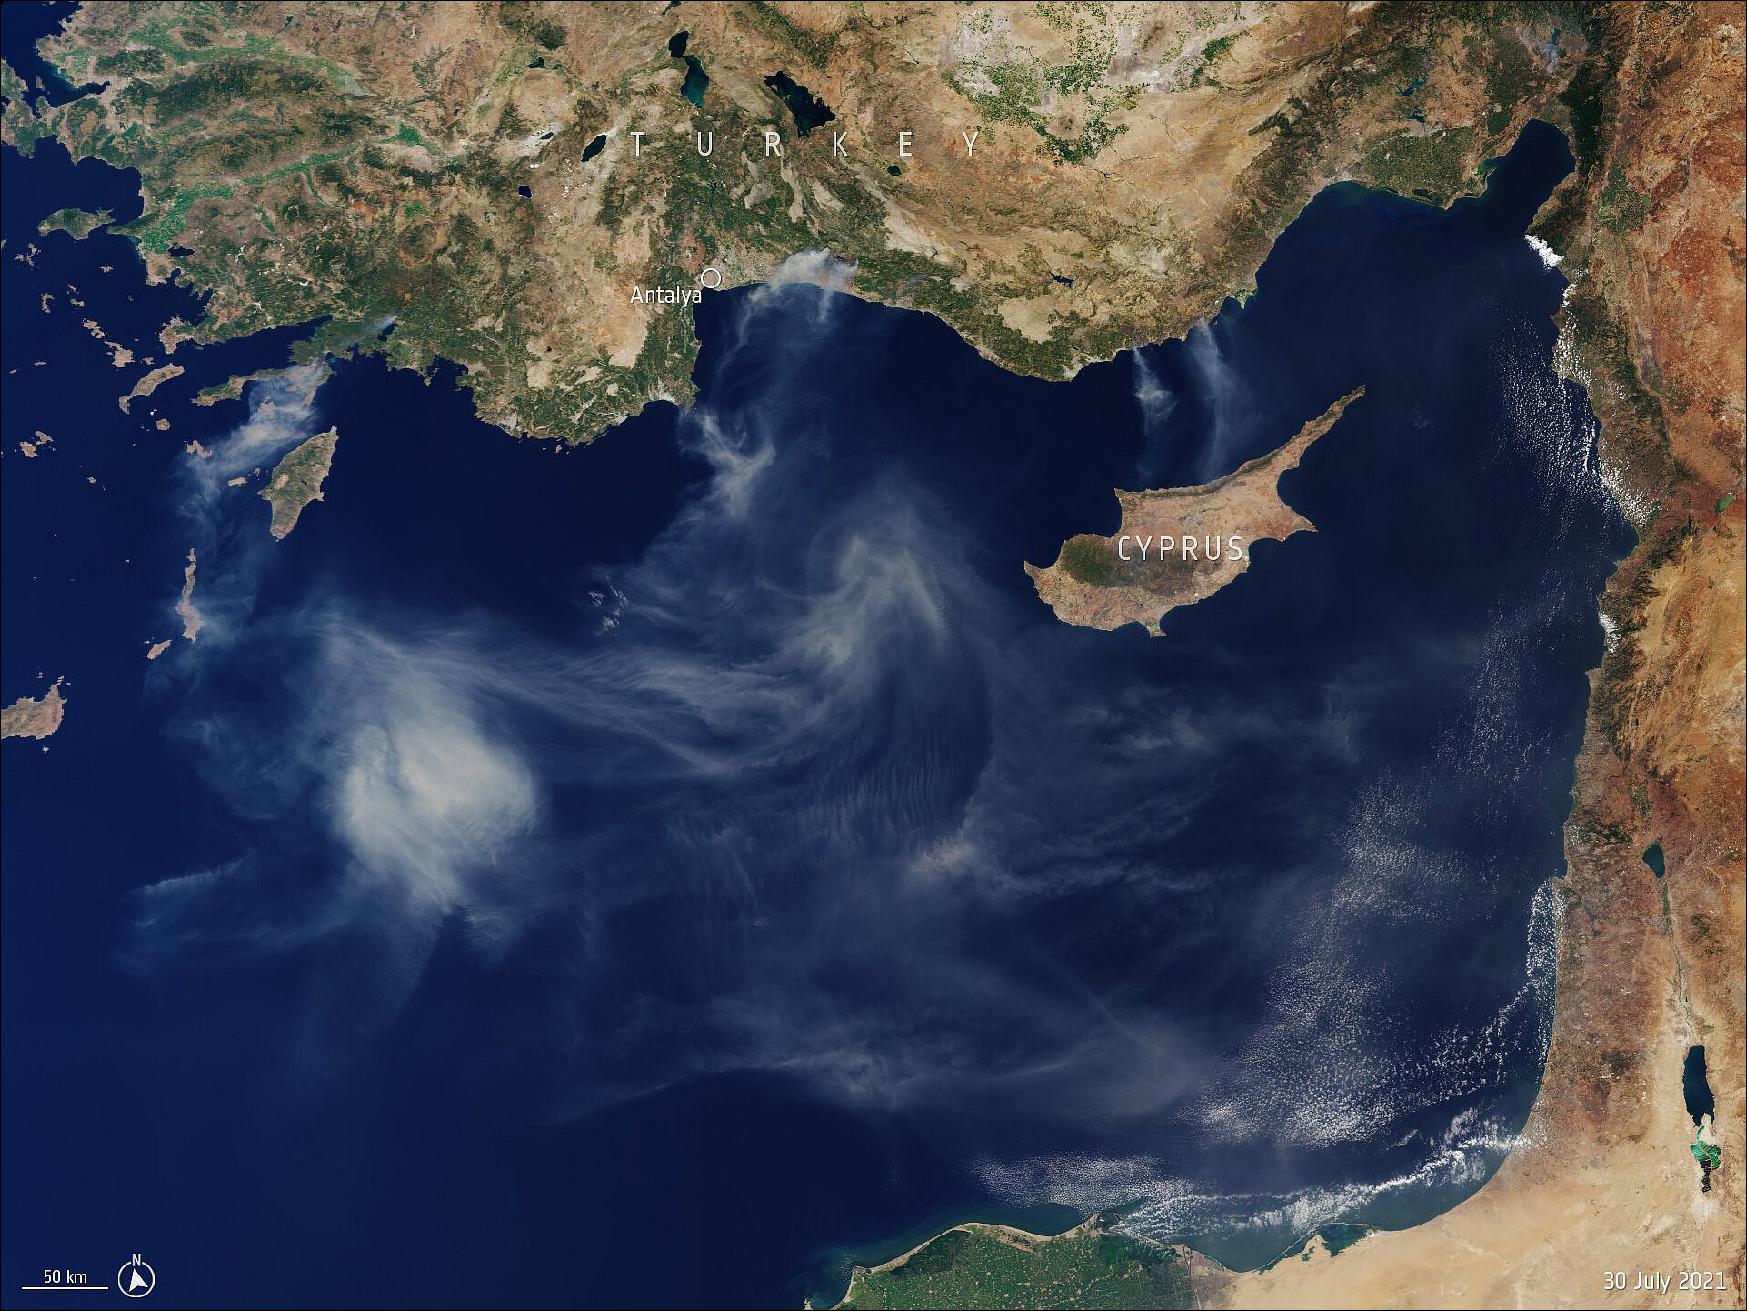 Figure 25: Smoke billows from fires in Turkey observed by the Sentinel-3 mission. Over the weekend, tourists and local residents had to be evacuated from Bodrum and Marmaris, with some fleeing by boat as the flames crept closer to the shoreline (image credit: ESA, the image contains modified Copernicus Sentinel data (2021), processed by ESA, CC BY-SA 3.0 IGO)